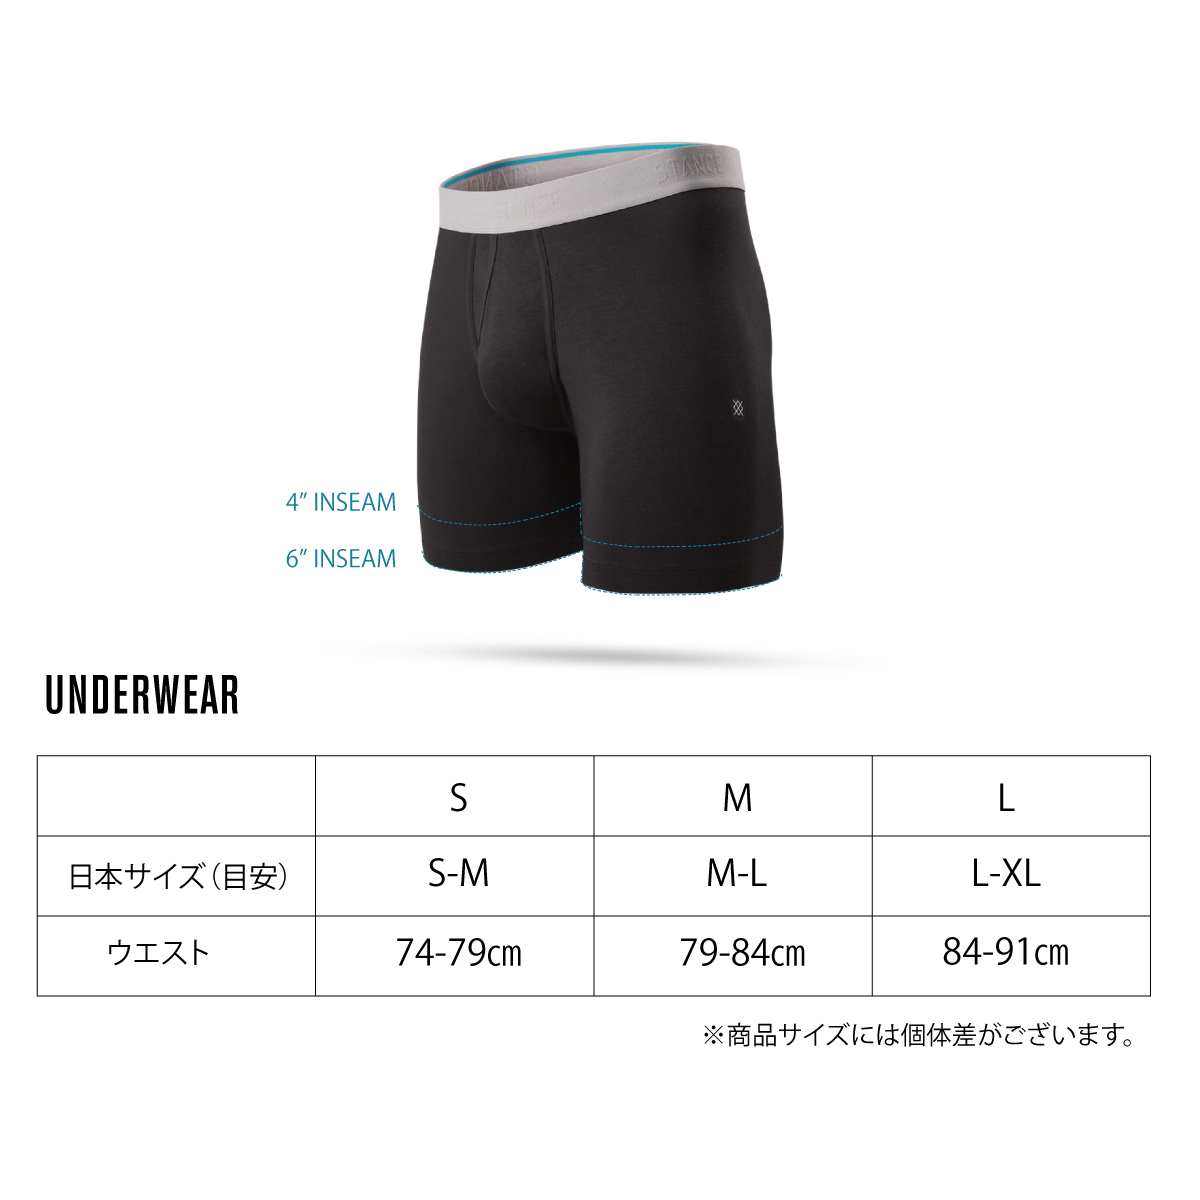 Stance Helquist Wholester Boxers in Black/Grey